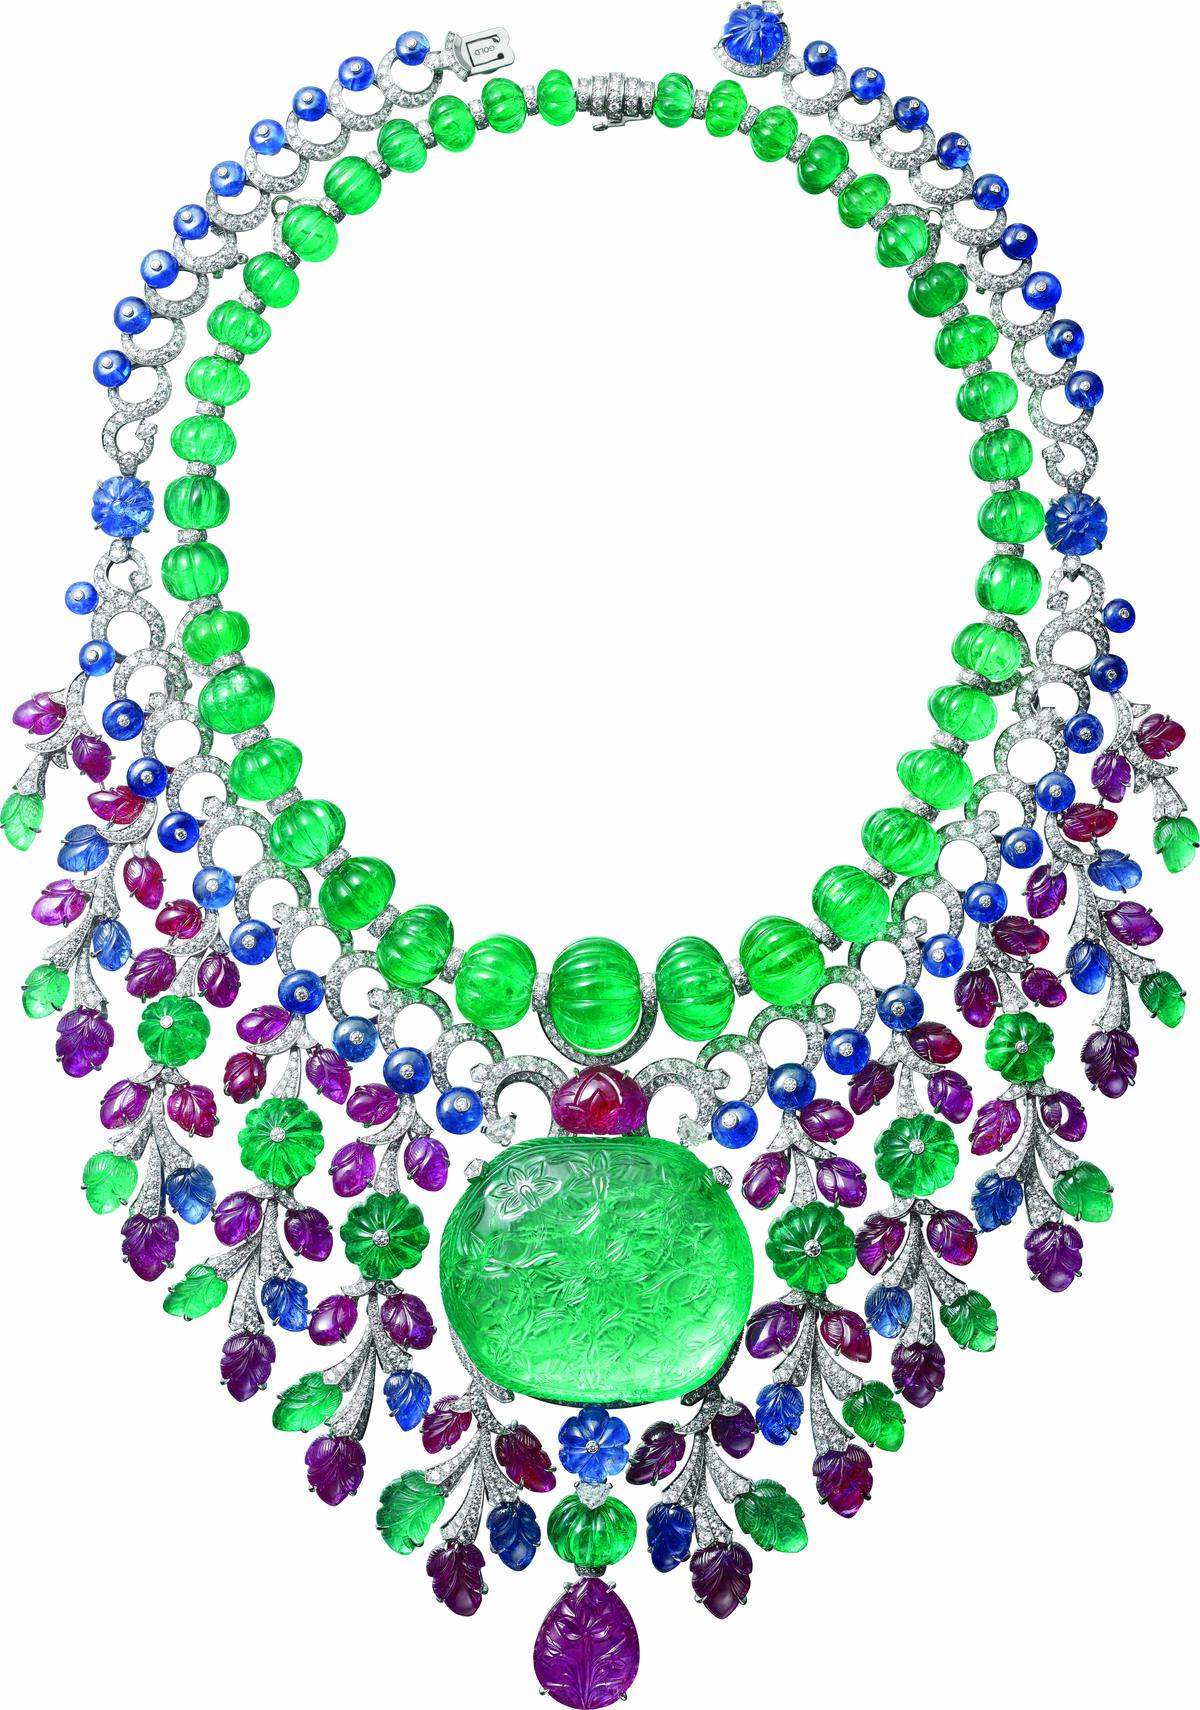 Rajasthan necklace (Cartier 2016) with an engraved 136.99 carat cushion-shaped emerald from Colombia